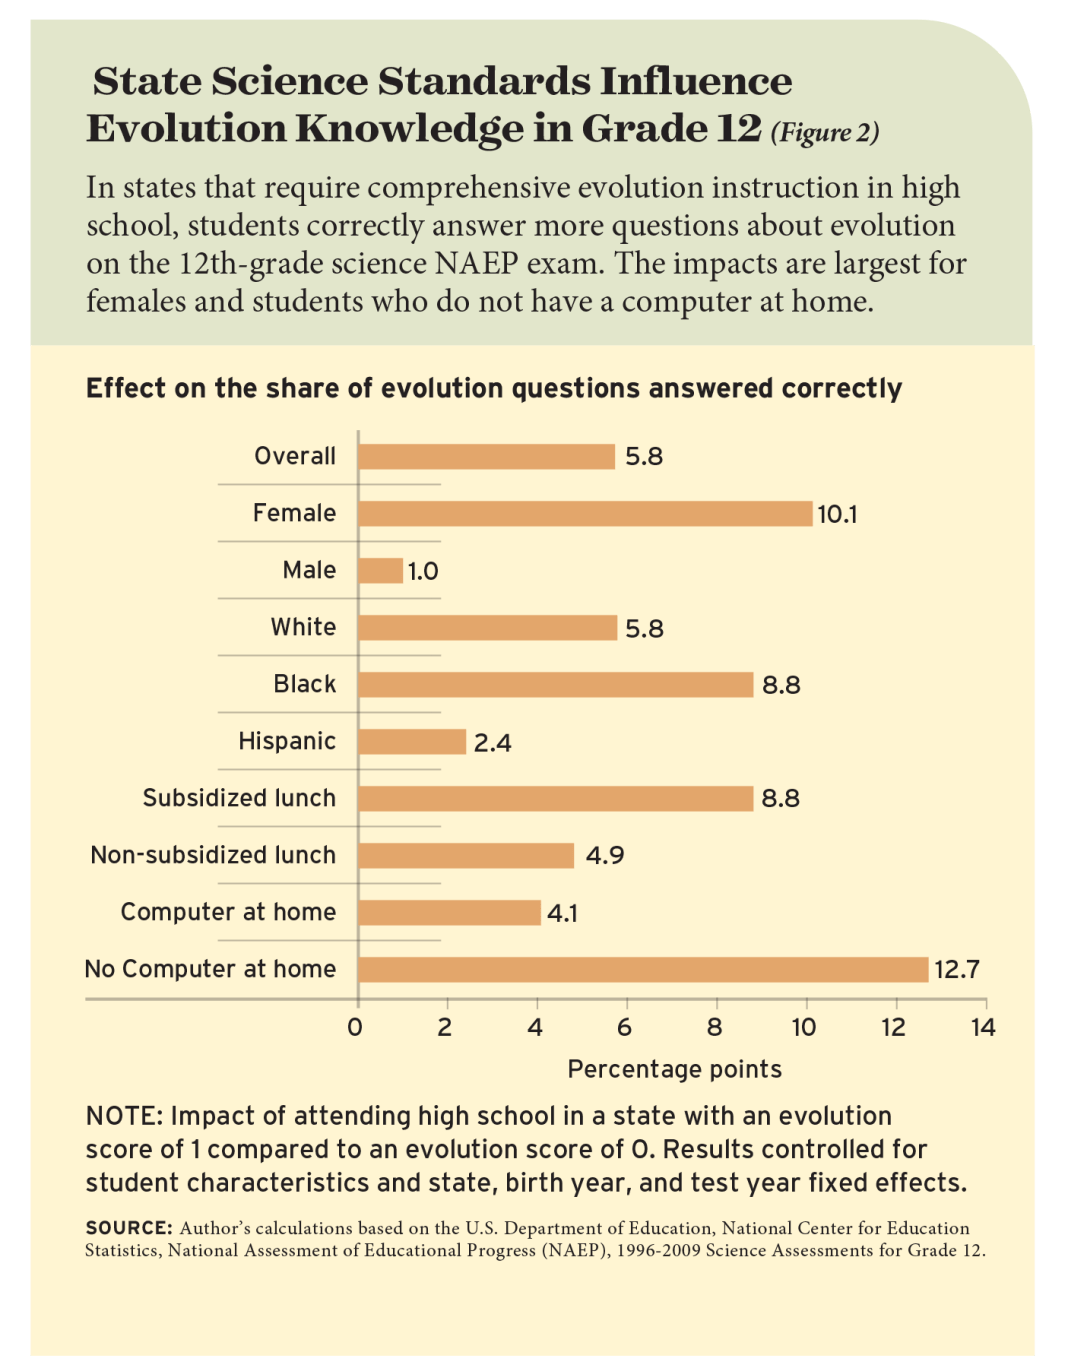 State Science Standards Influence Evolution Knowledge in Grade 12 (Figure 2)